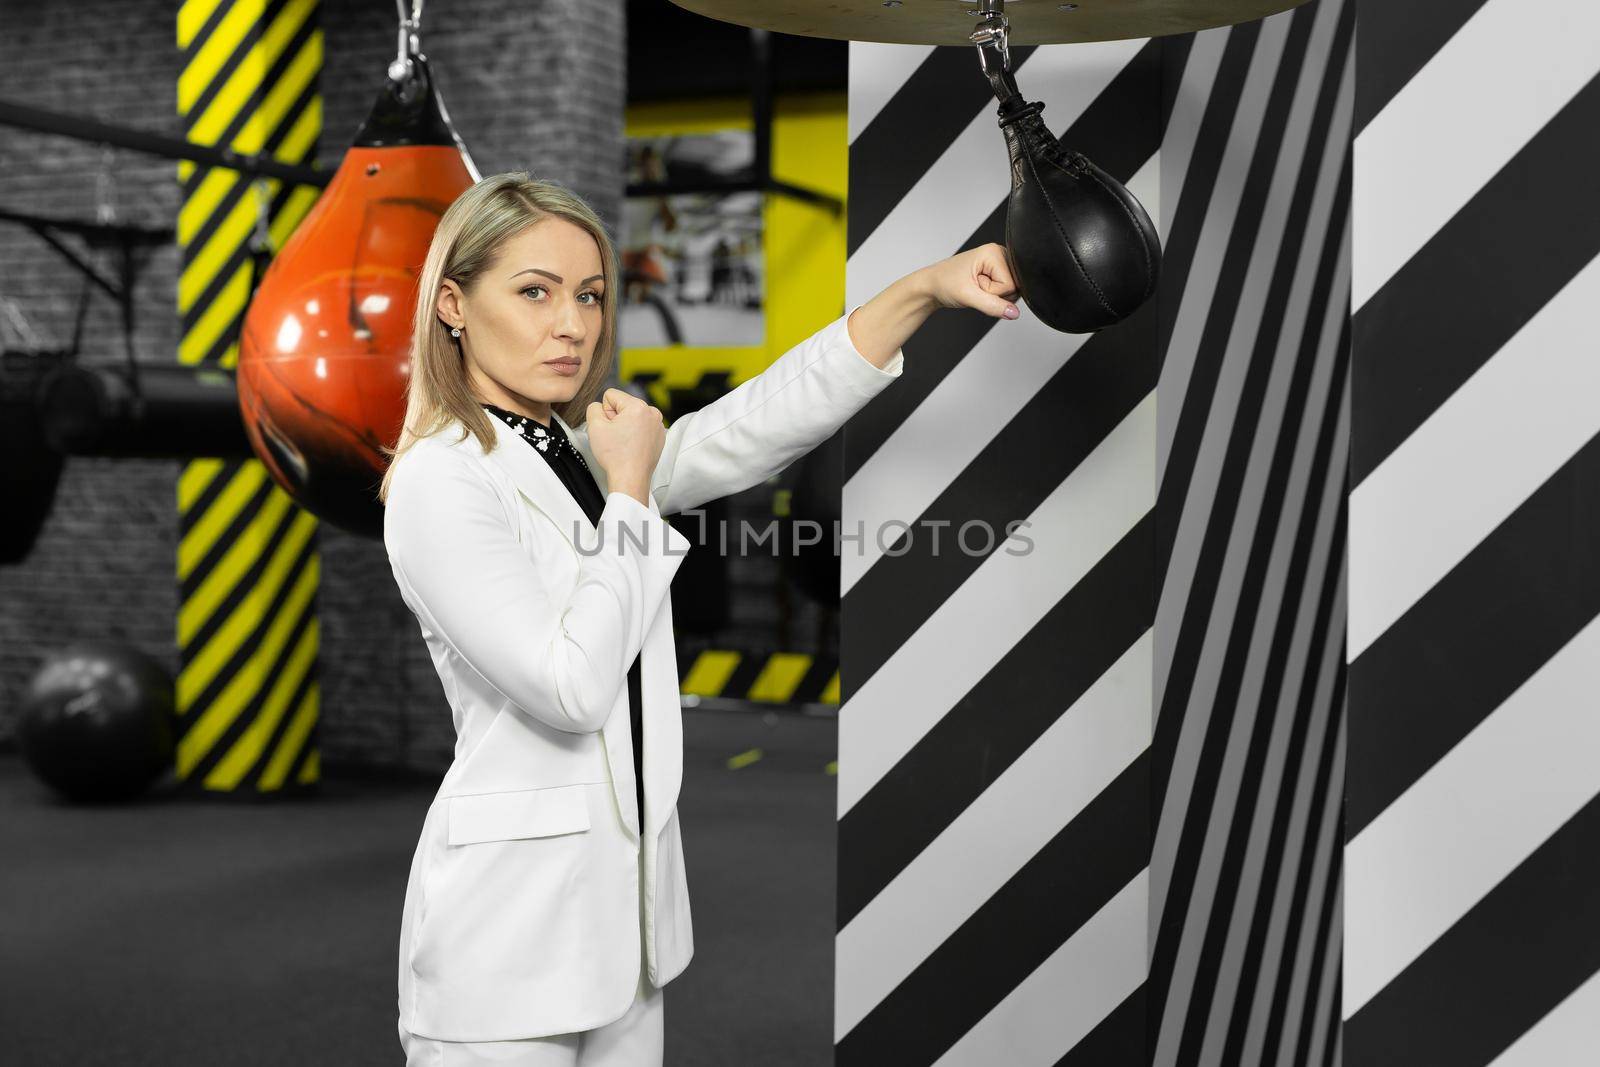 Serious, focused businesswoman hits a punching bag in the gym. The concept of anger management by StudioPeace